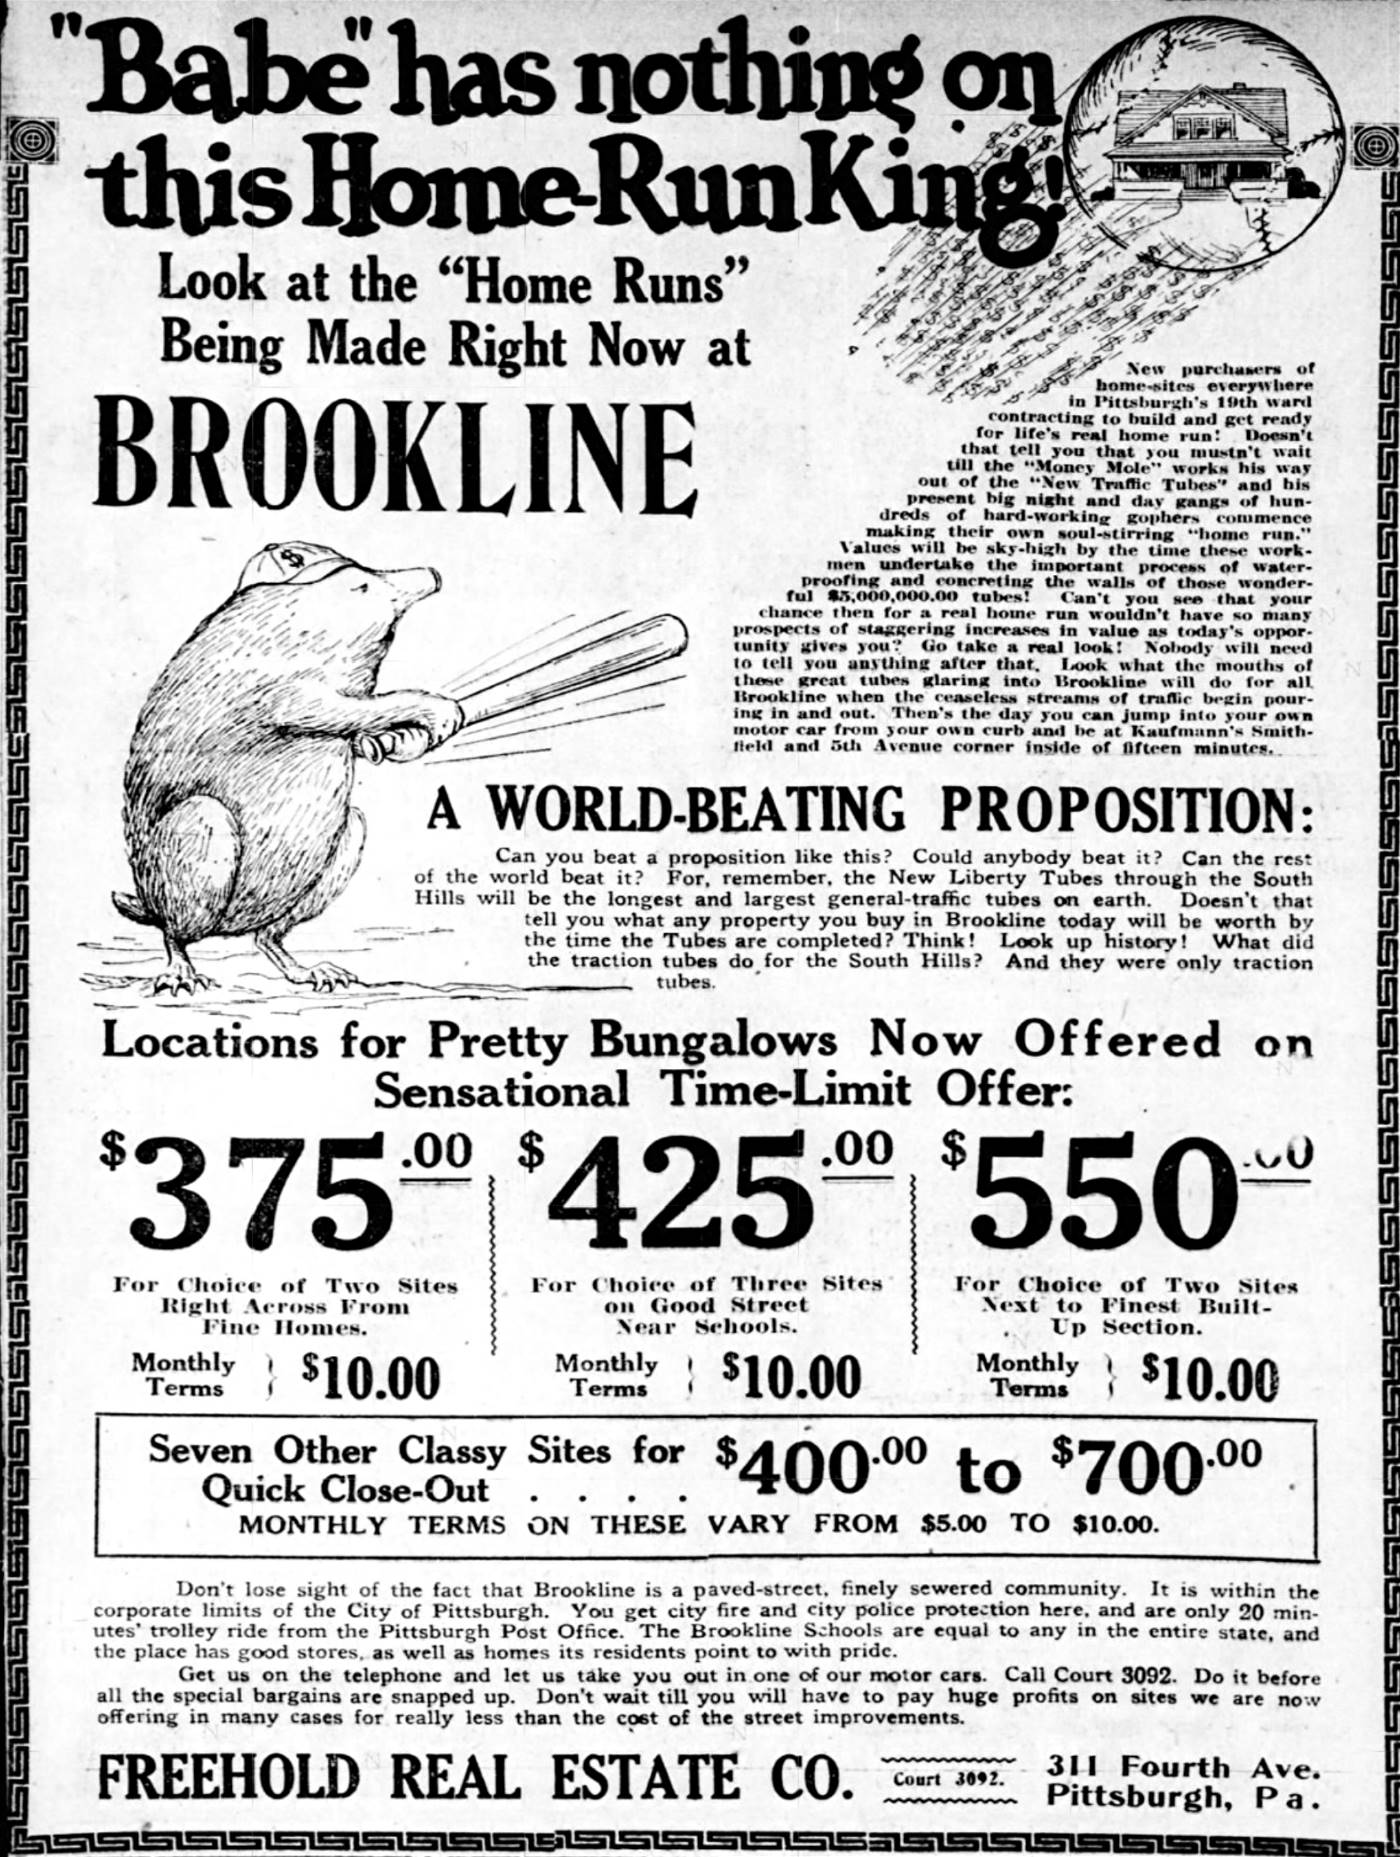 Real Estate Advertisement - May 8, 1921.